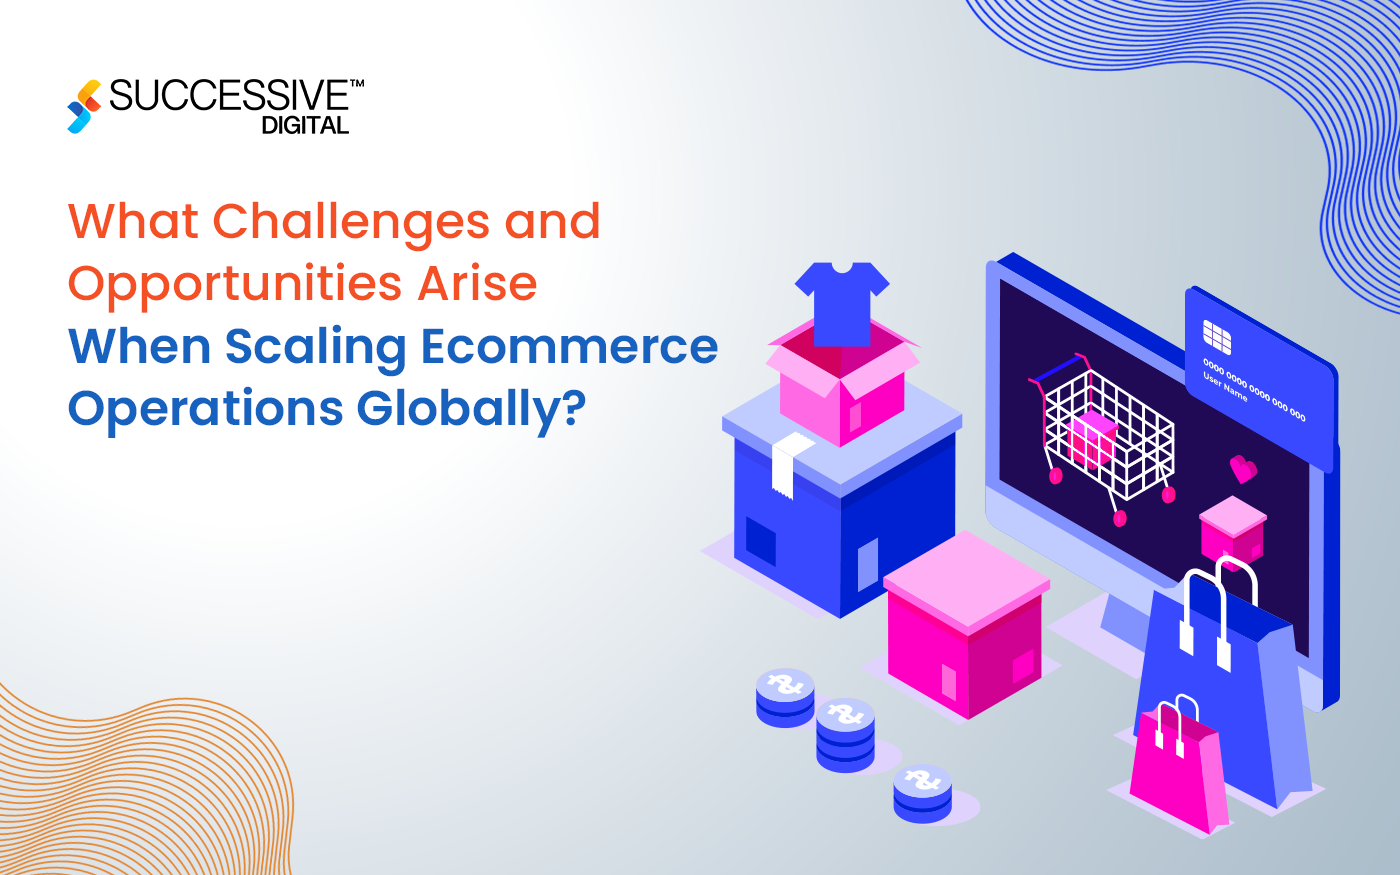 What Challenges and Opportunities Arise When Scaling Ecommerce Operations Globally?